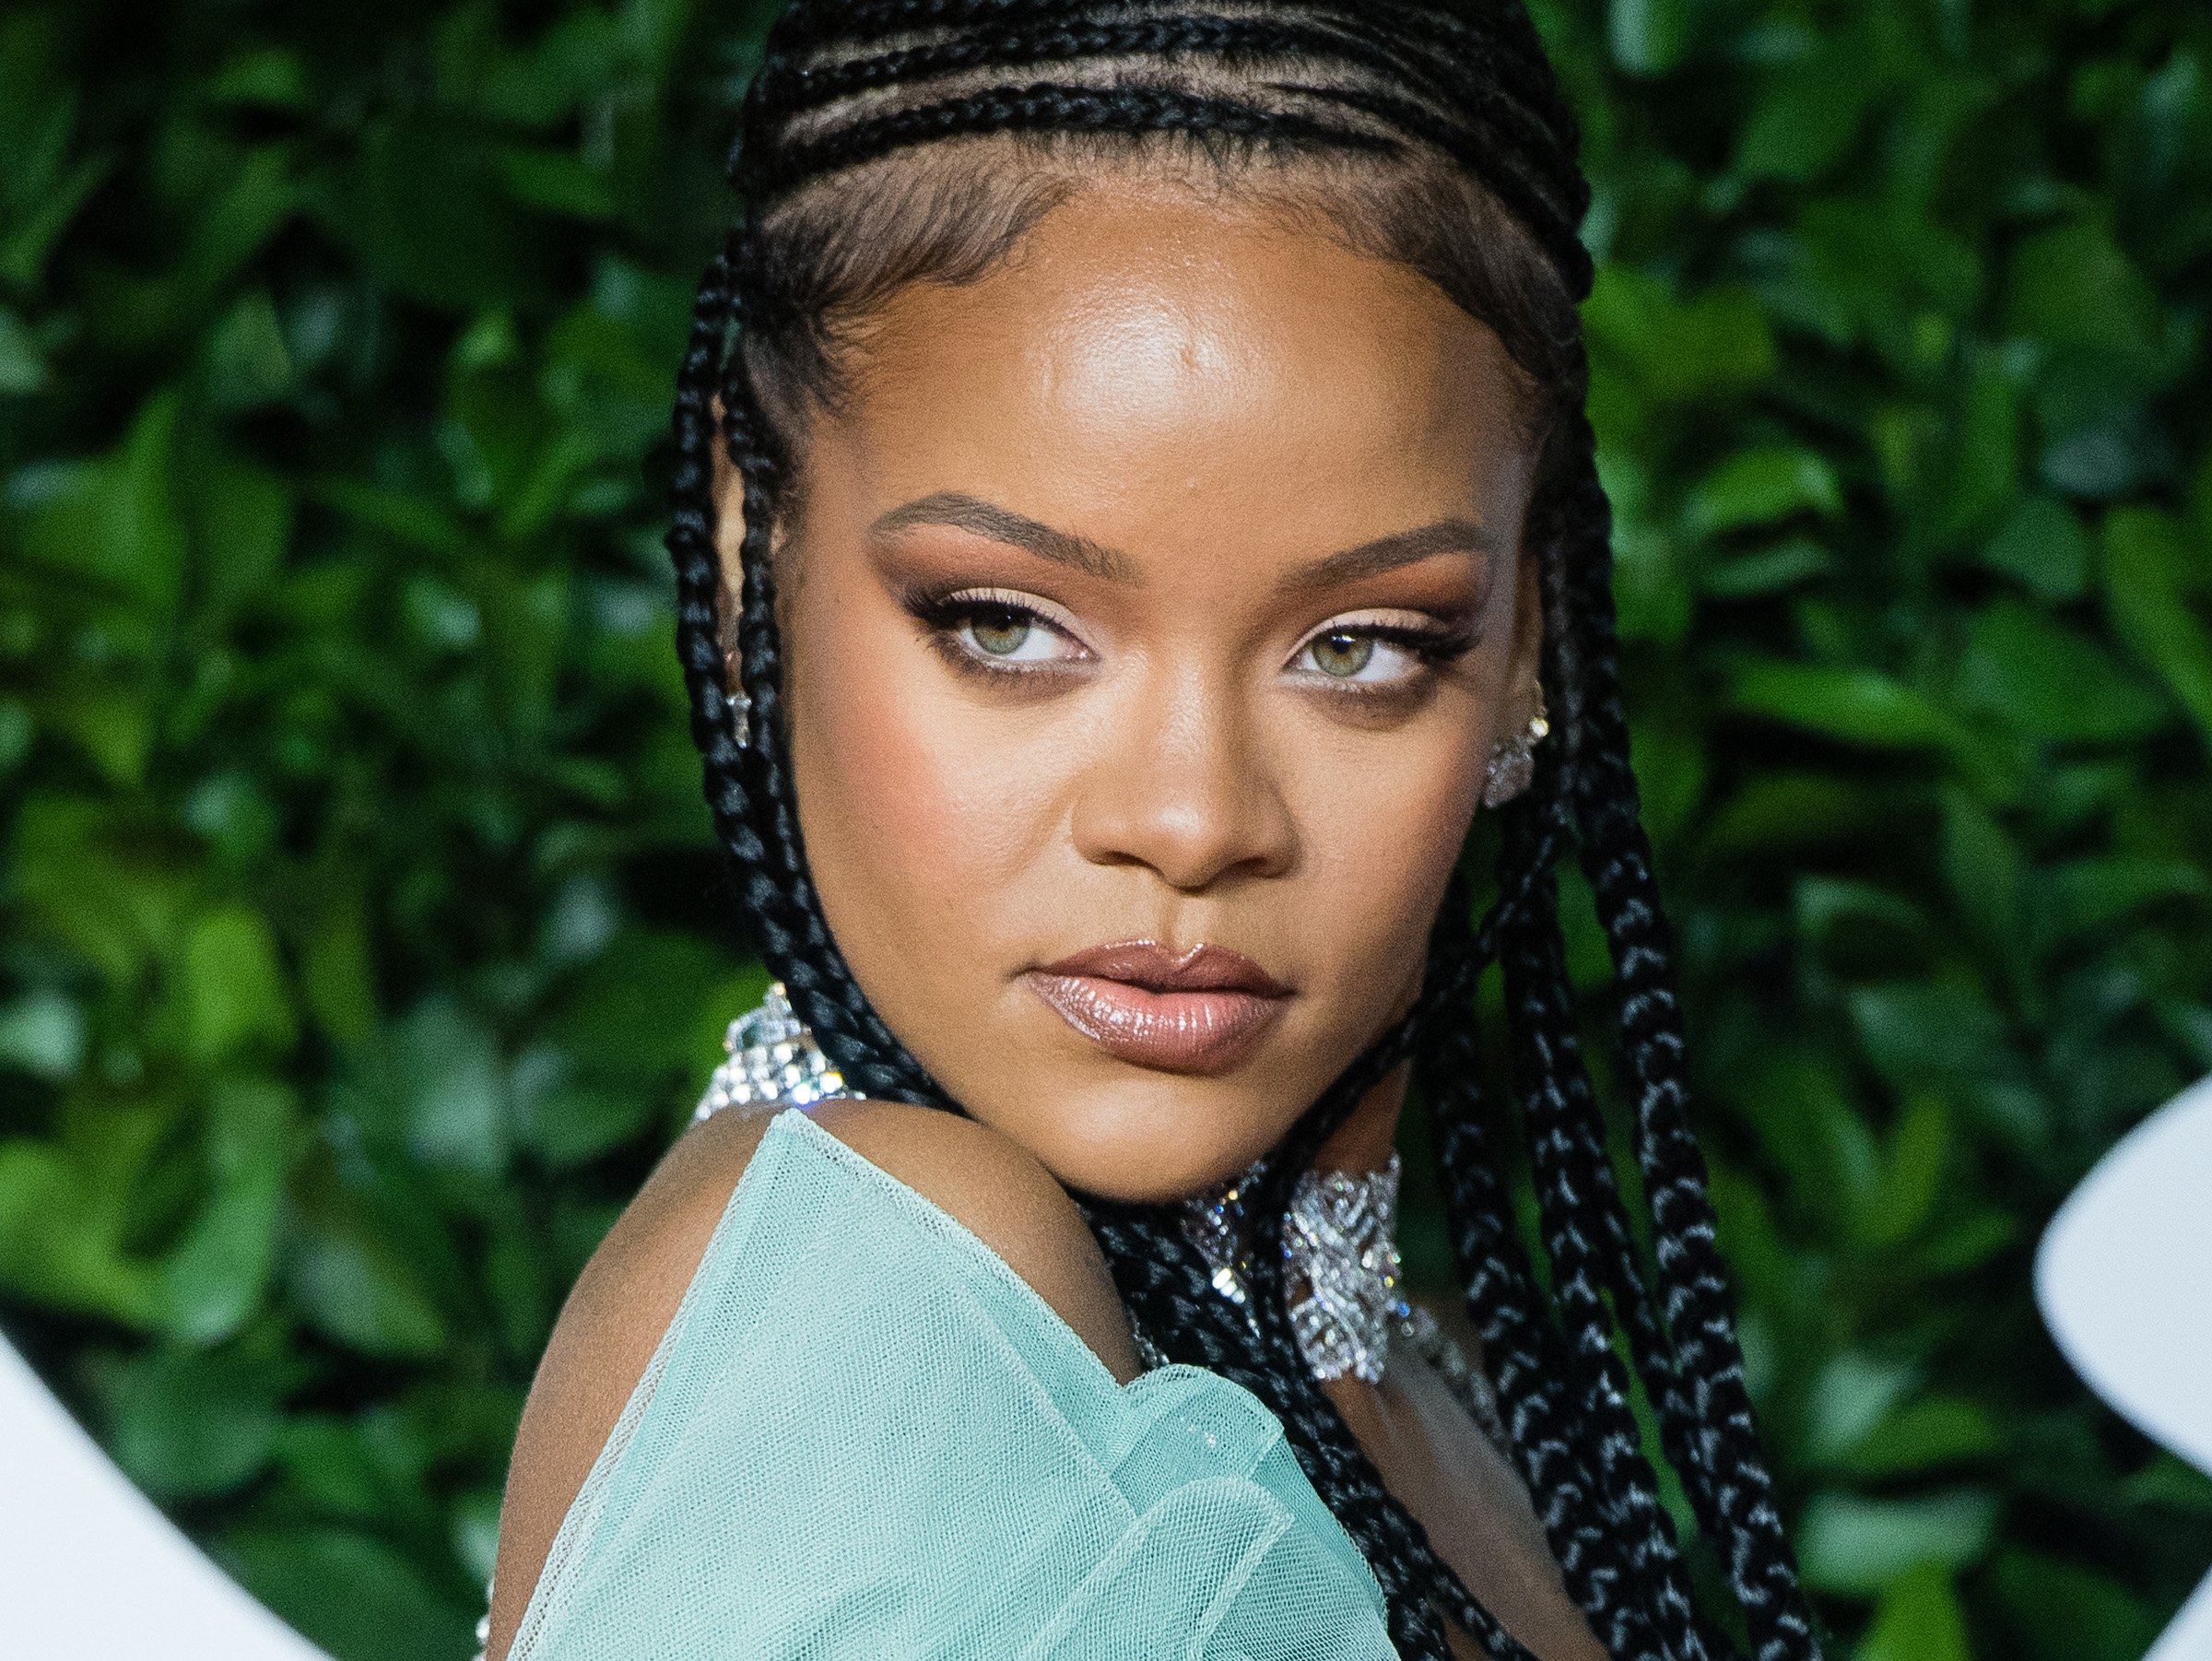 Rihanna is mostly succeeding in her mission to make a more